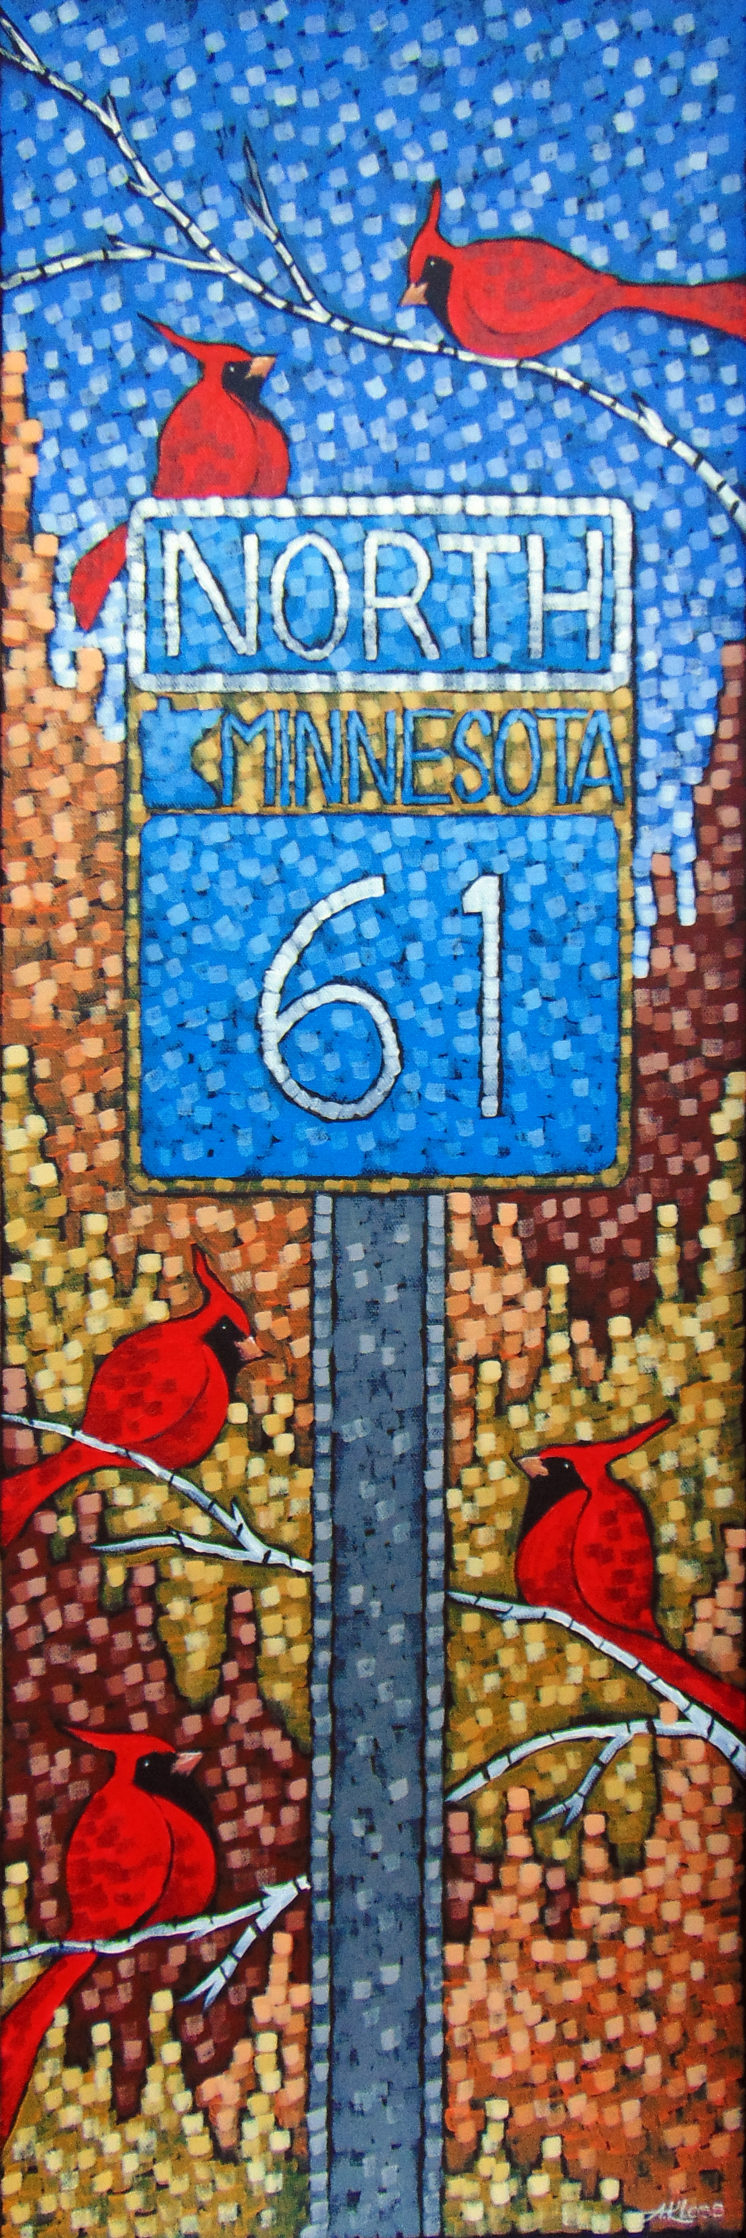 Painting of a flock of red cardinals perched near a Minnesota Highway 61 sign